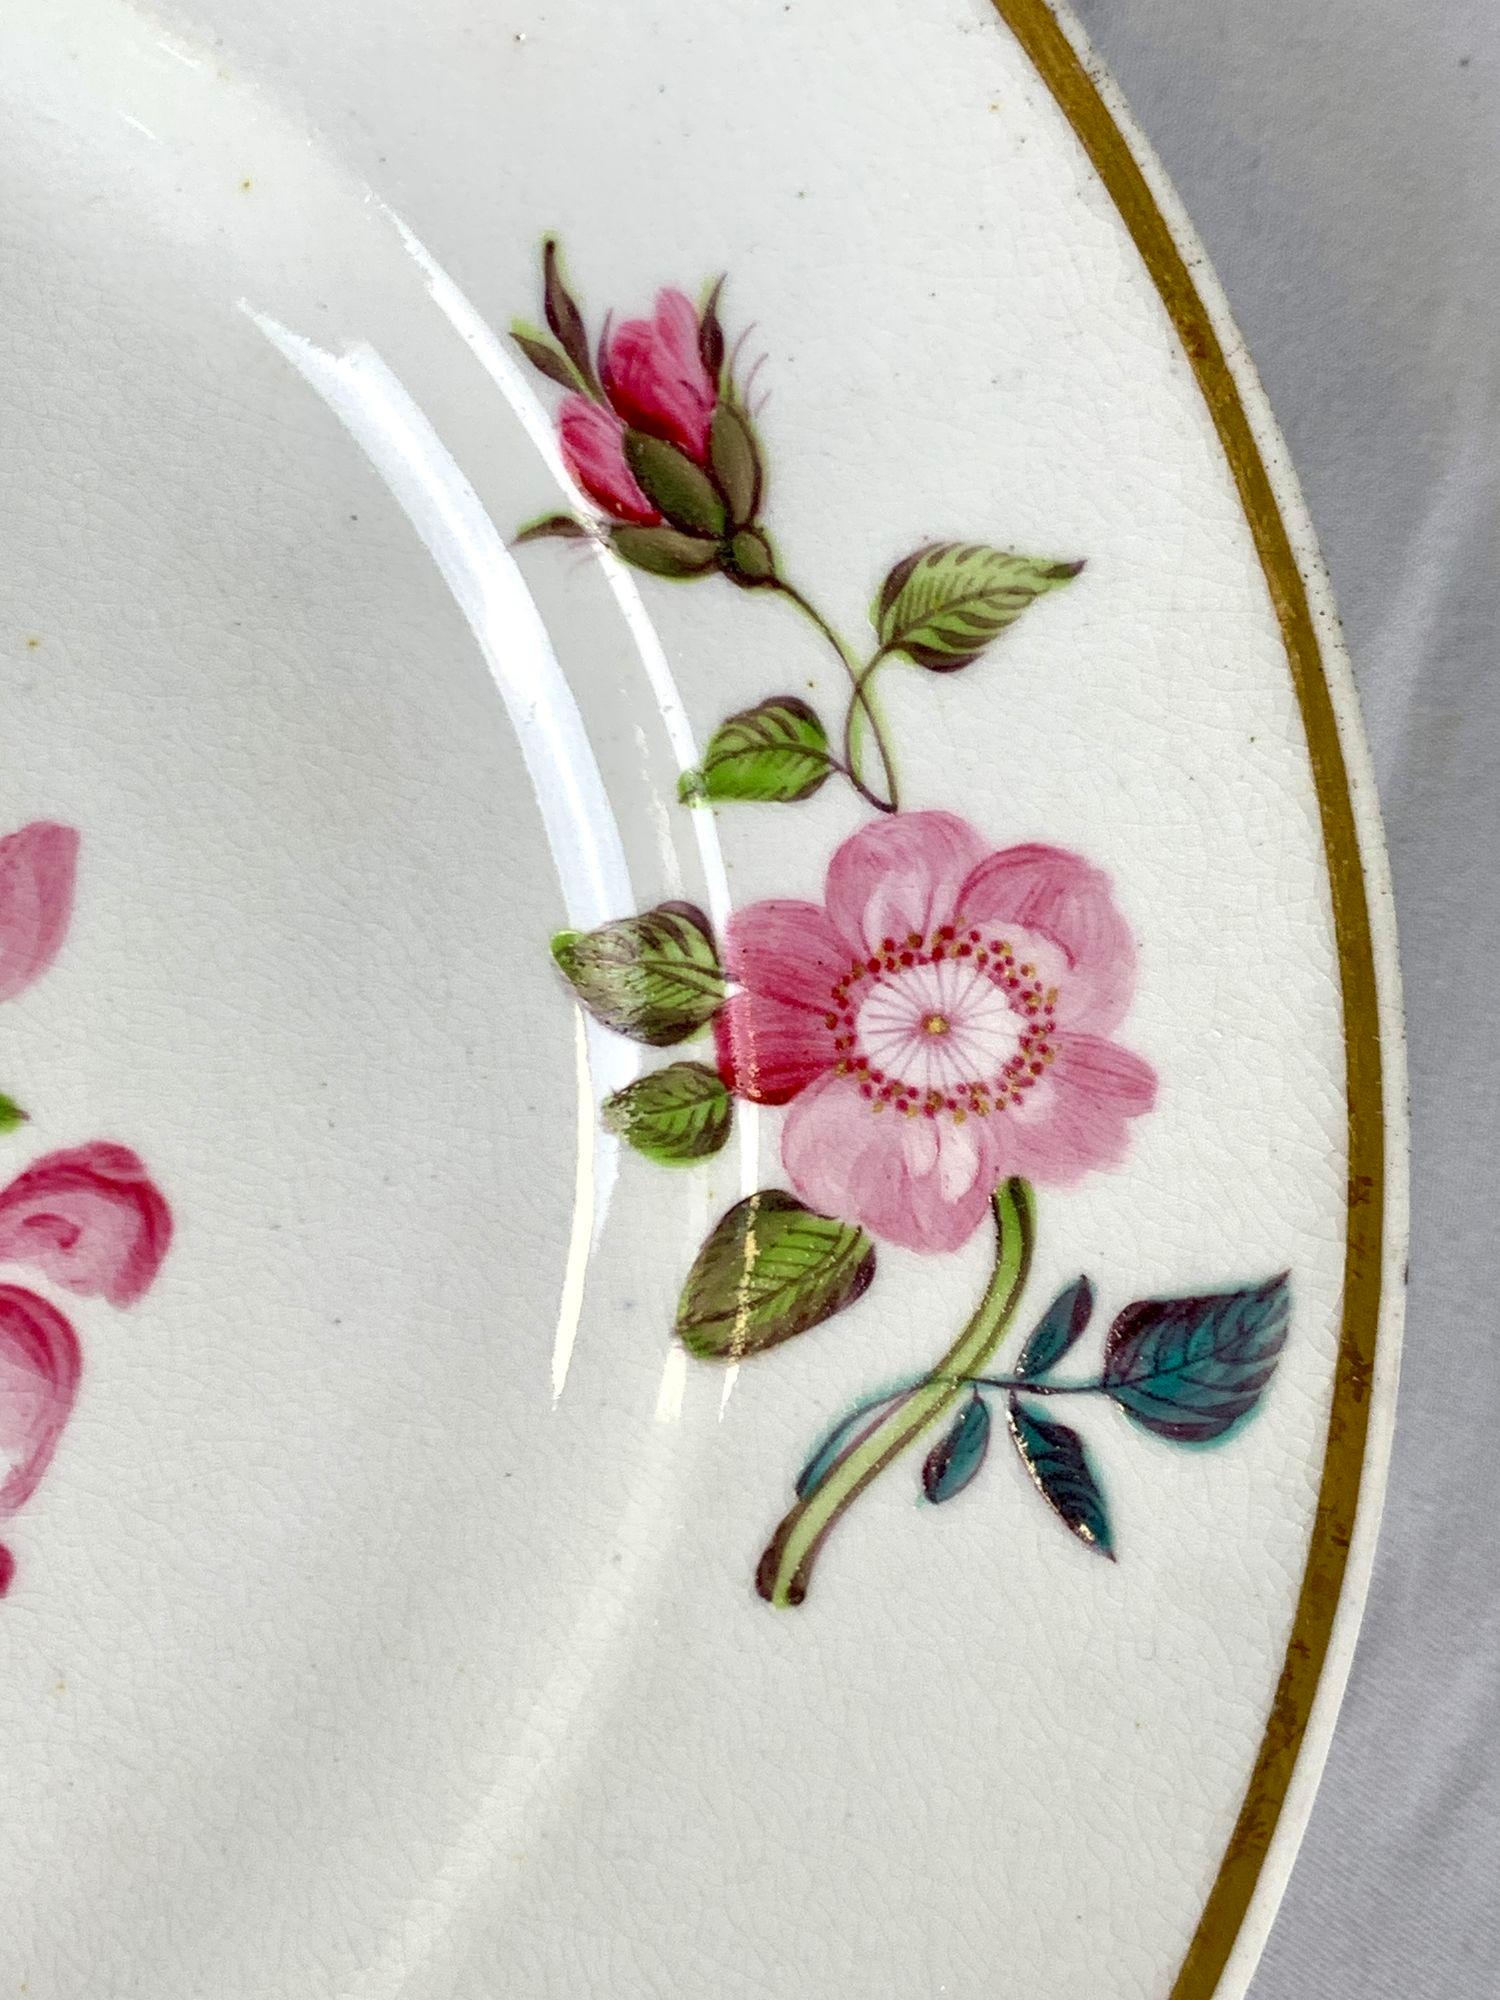 Porcelain Set Seven Derby Dishes Hand Painted with Pink Roses Early 19th Century Ca-1815 For Sale